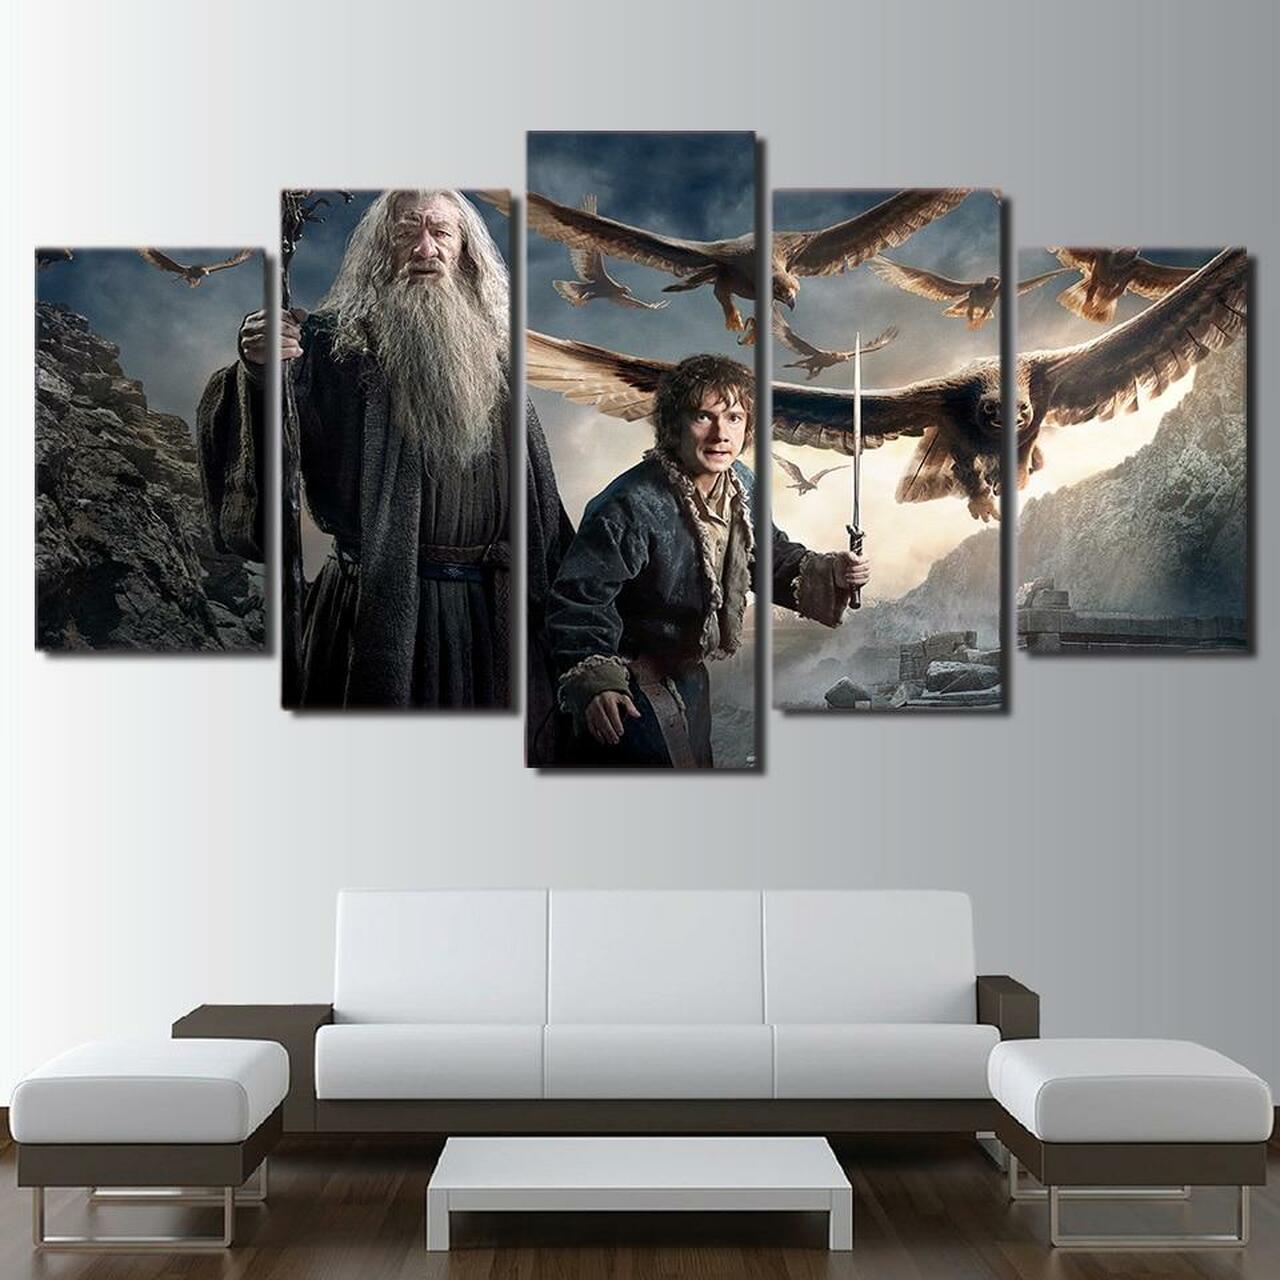 Hobbit Lord Of The Rings 5 Piece Canvas Art Wall Decor – CA Go Canvas